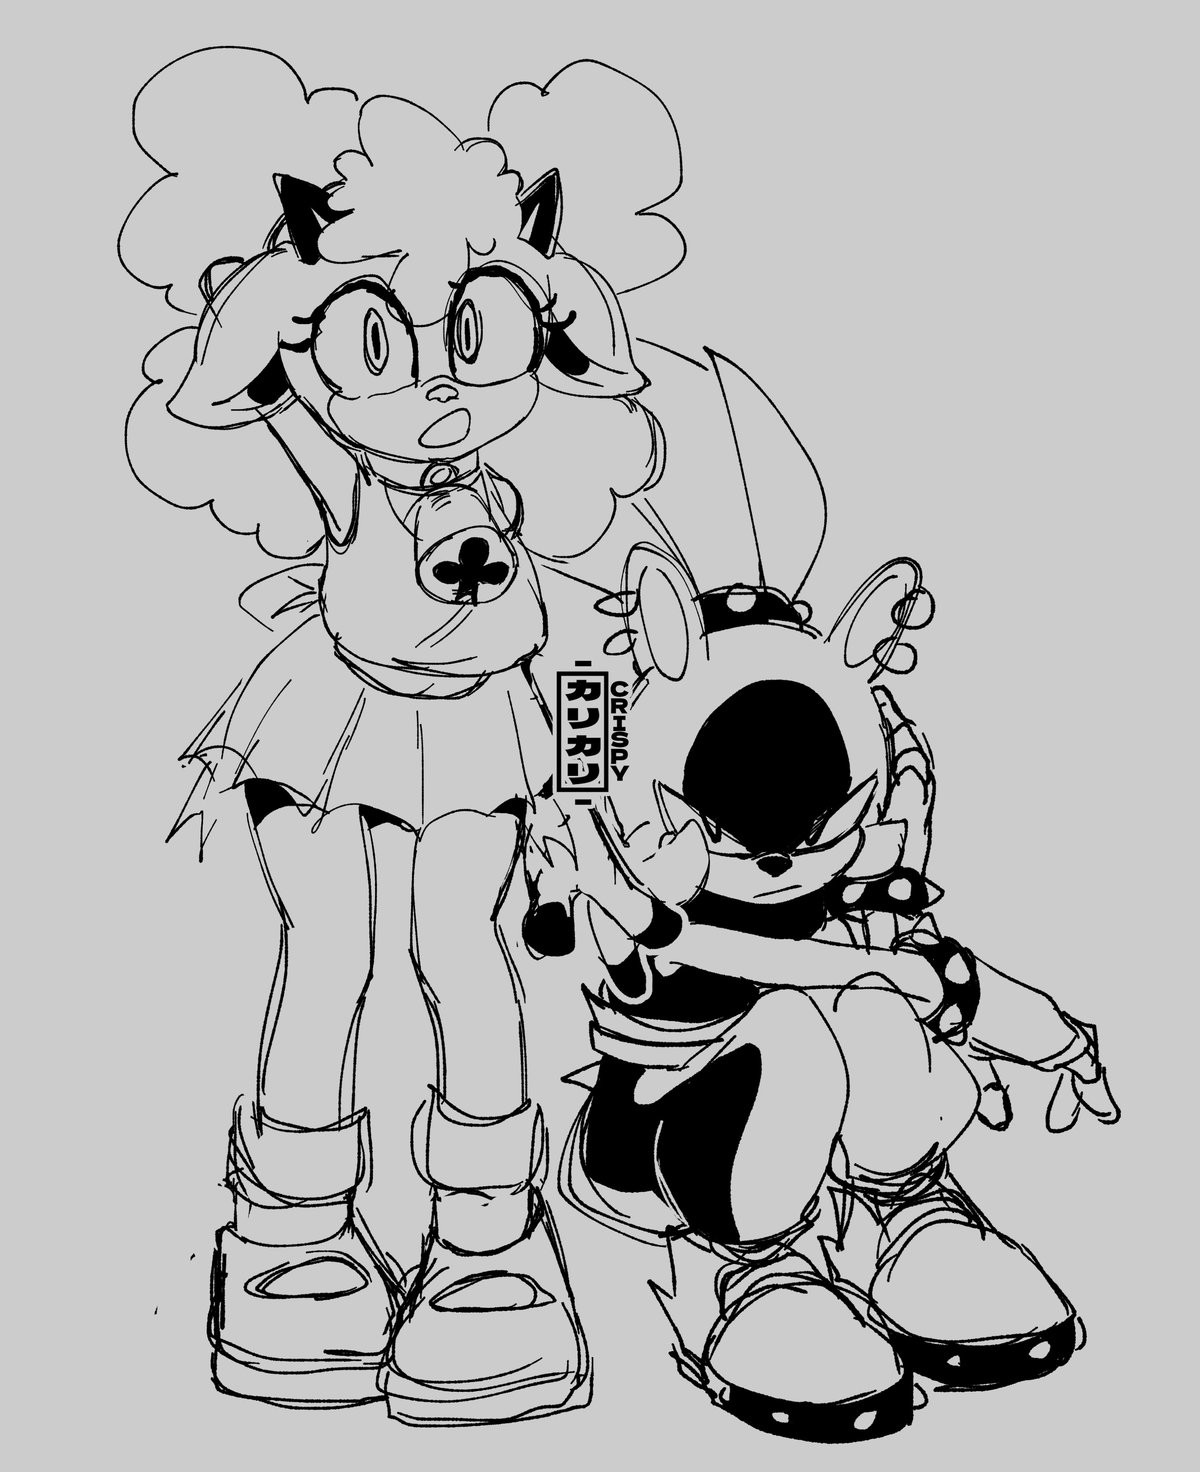 Sheep and Tenrec. .. Apparently sheep girls name is Lanolin Shes the girl who was a huge bitch to Belle in IDW 